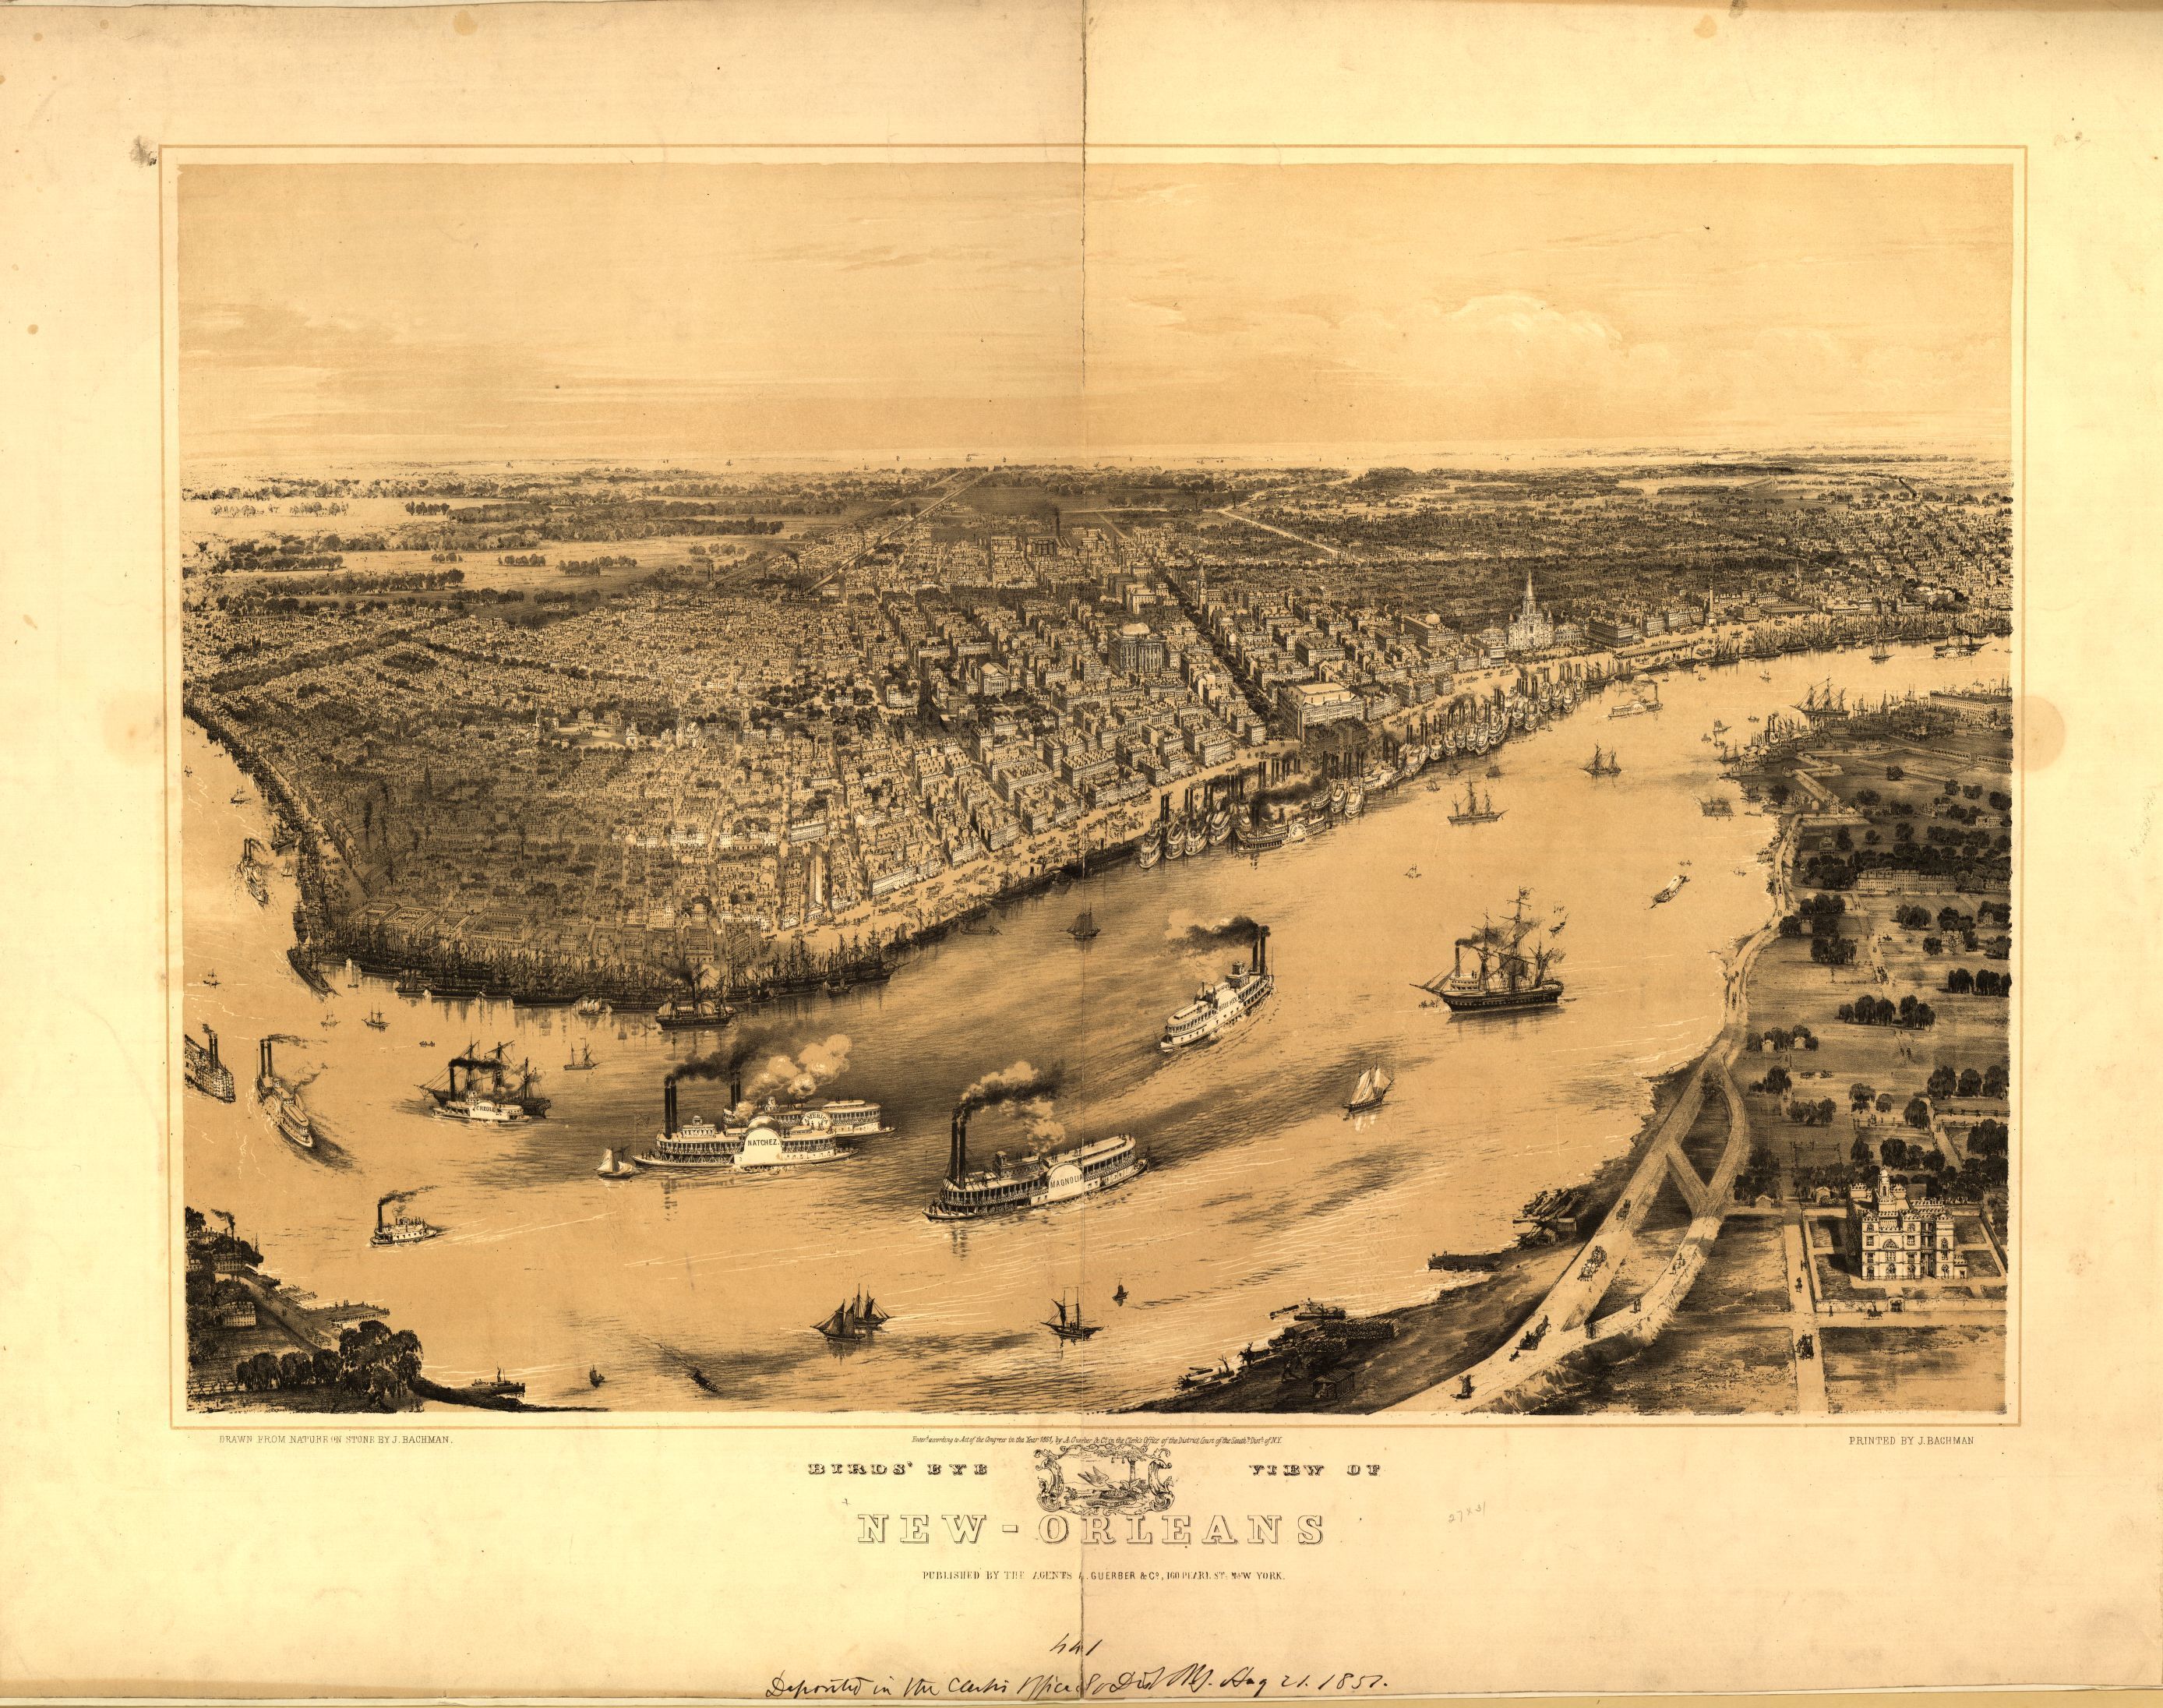 Print of Birds-eye view of New Orleans, with the river in the foreground.